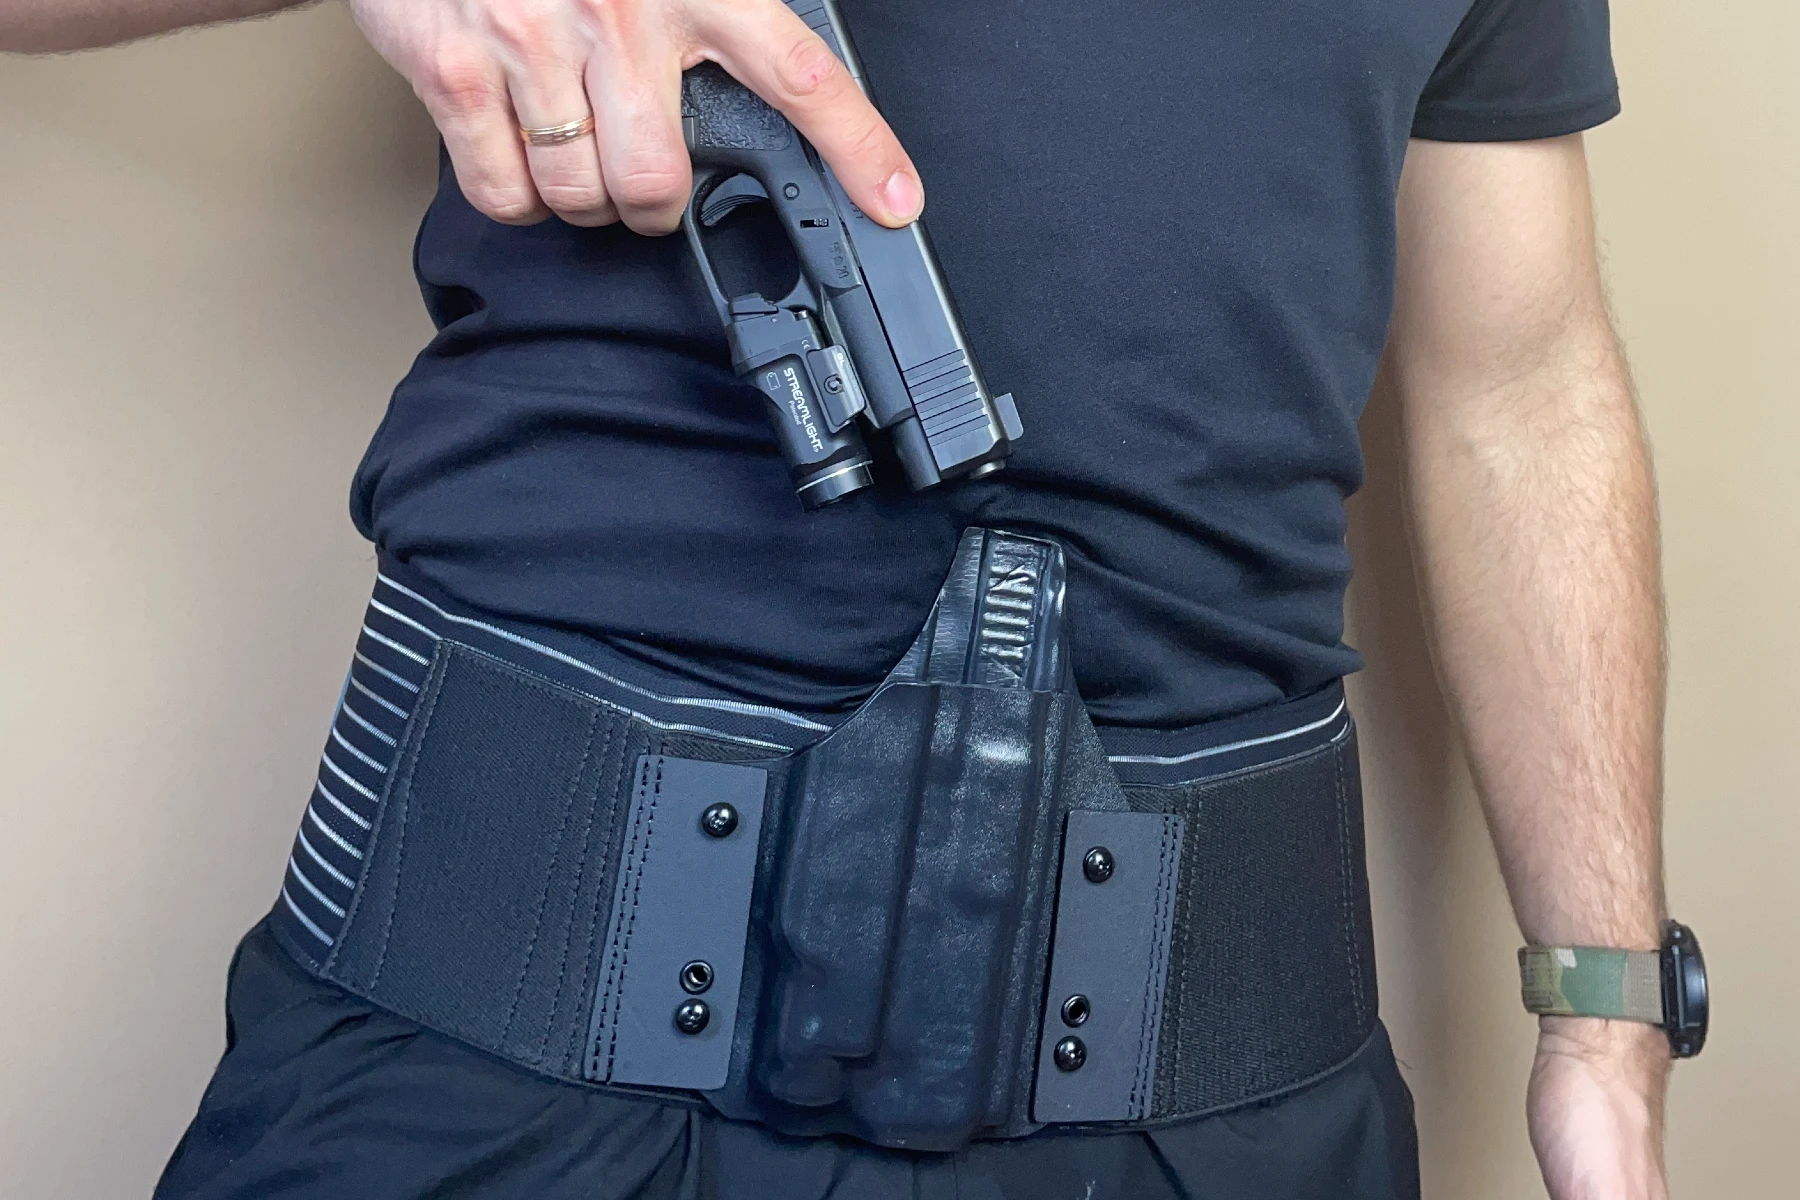 Belly band holster for gun with light